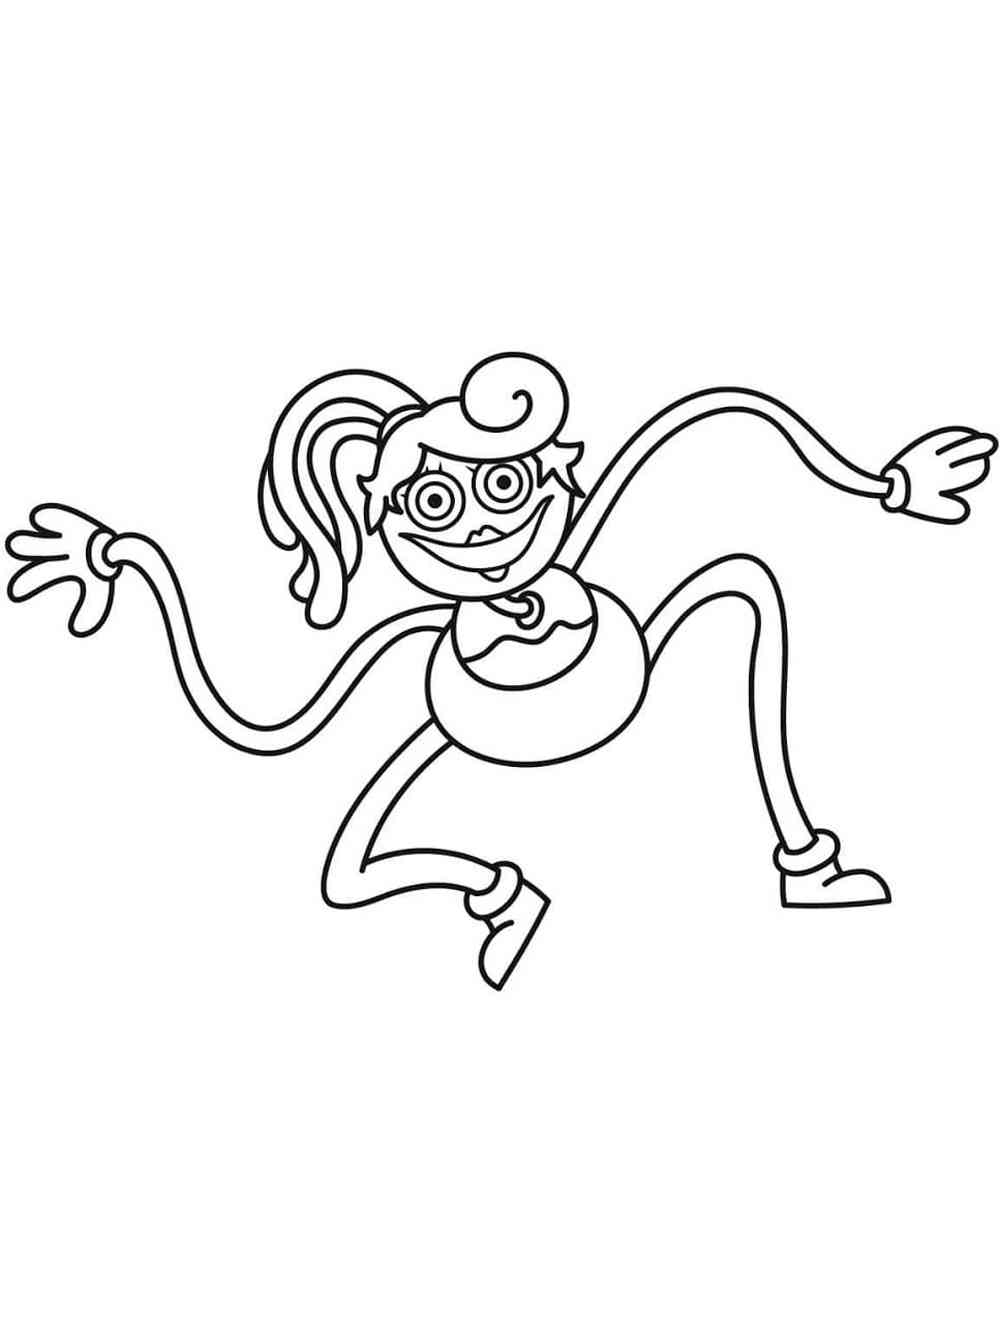 Happy Mommy Long Legs coloring page